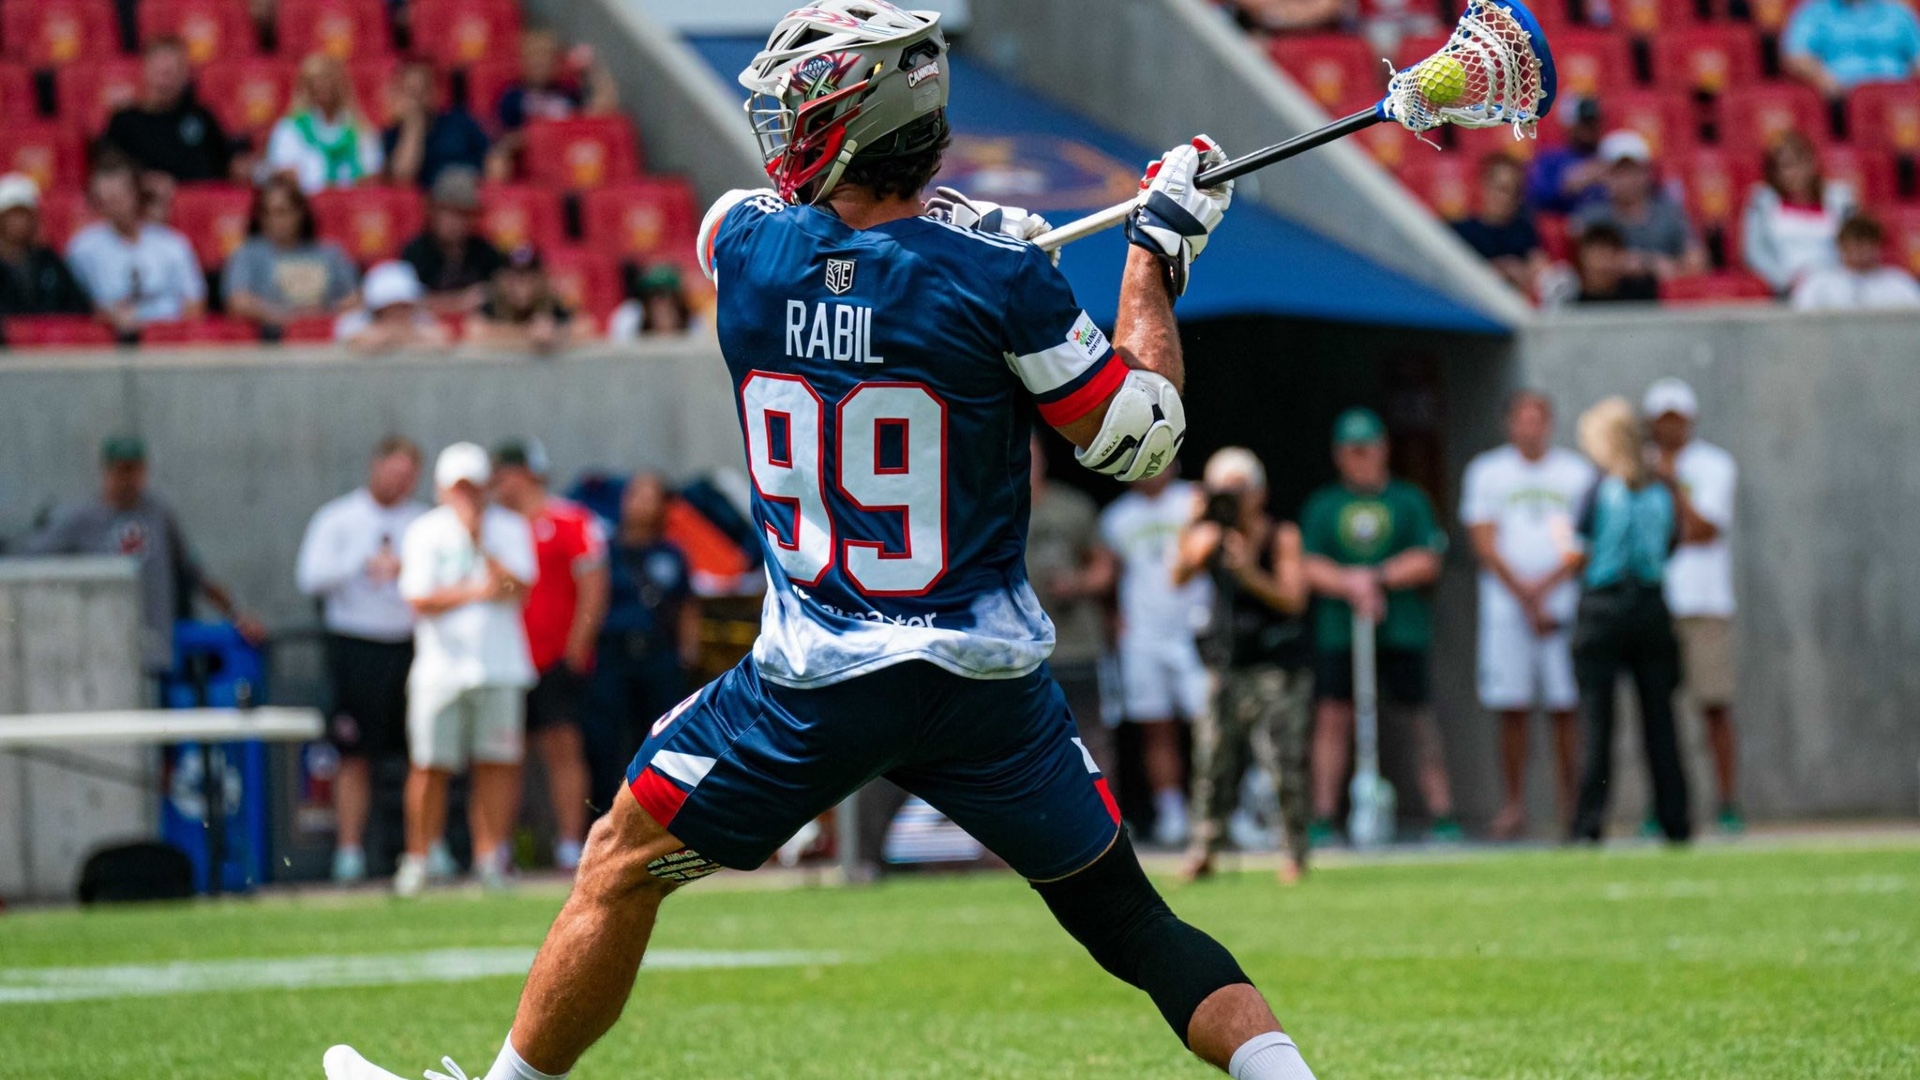 PLL co-founder and DeMatha product Paul Rabil retires after 14-year playing  career - WTOP News